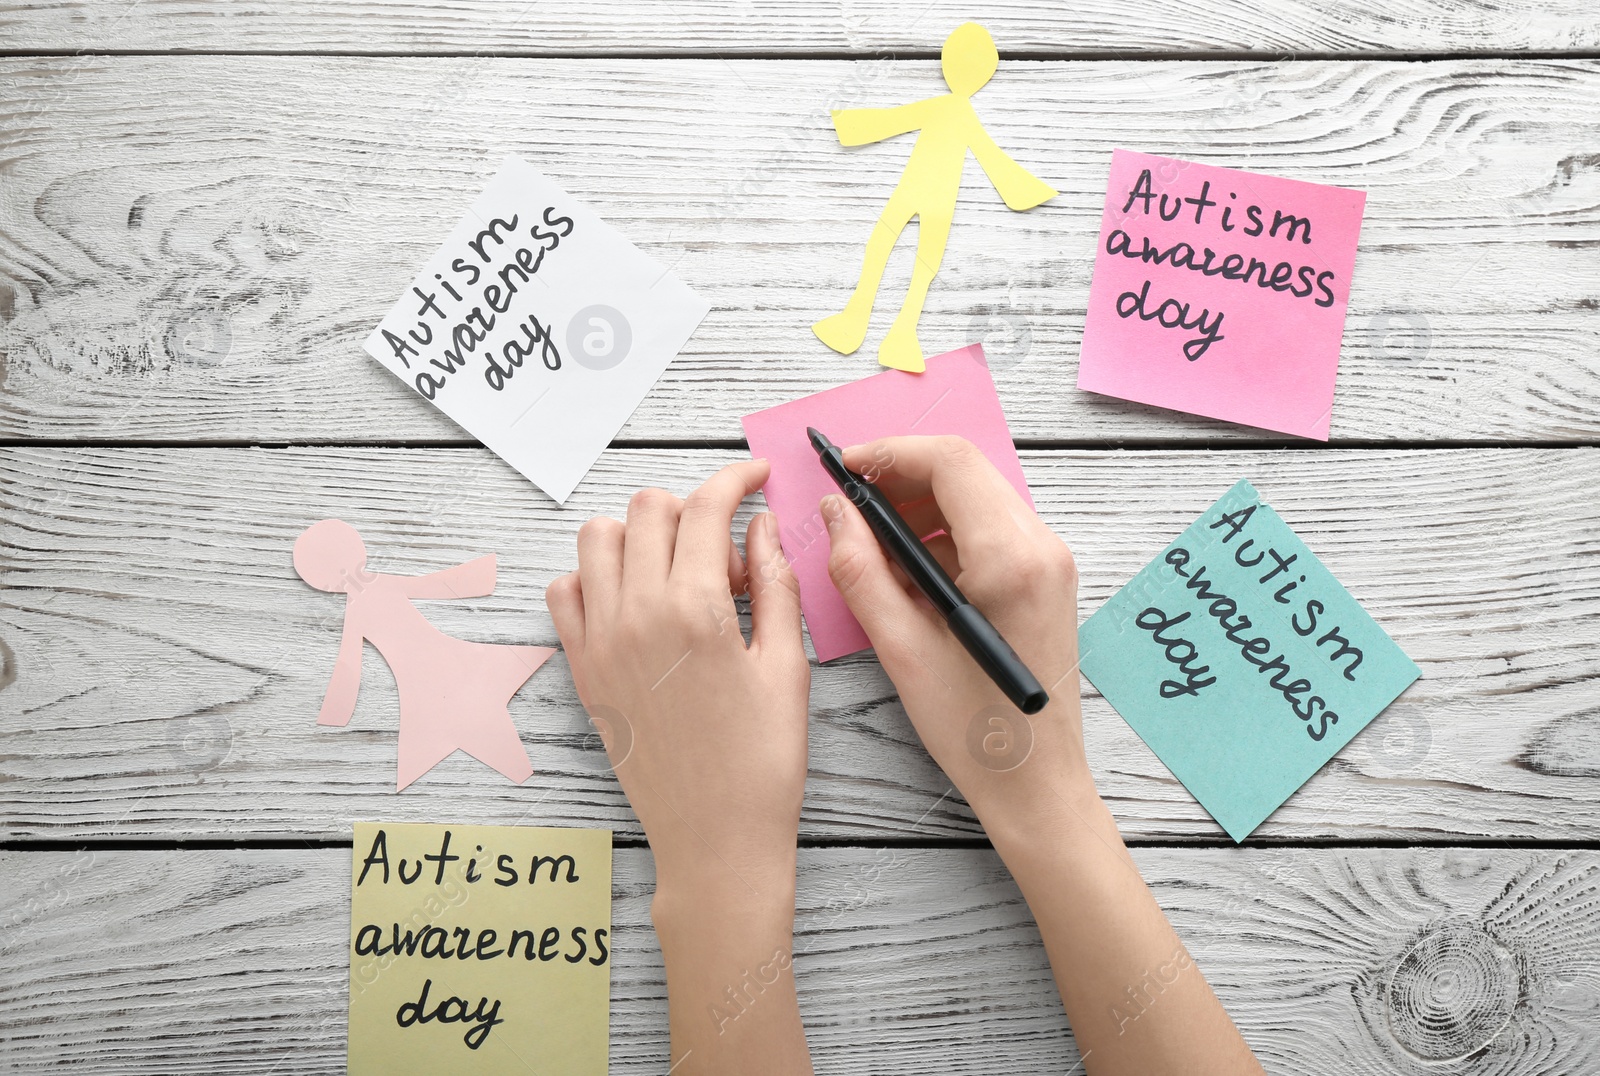 Photo of Woman and sticky notes with phrase "Autism awareness day" on wooden background